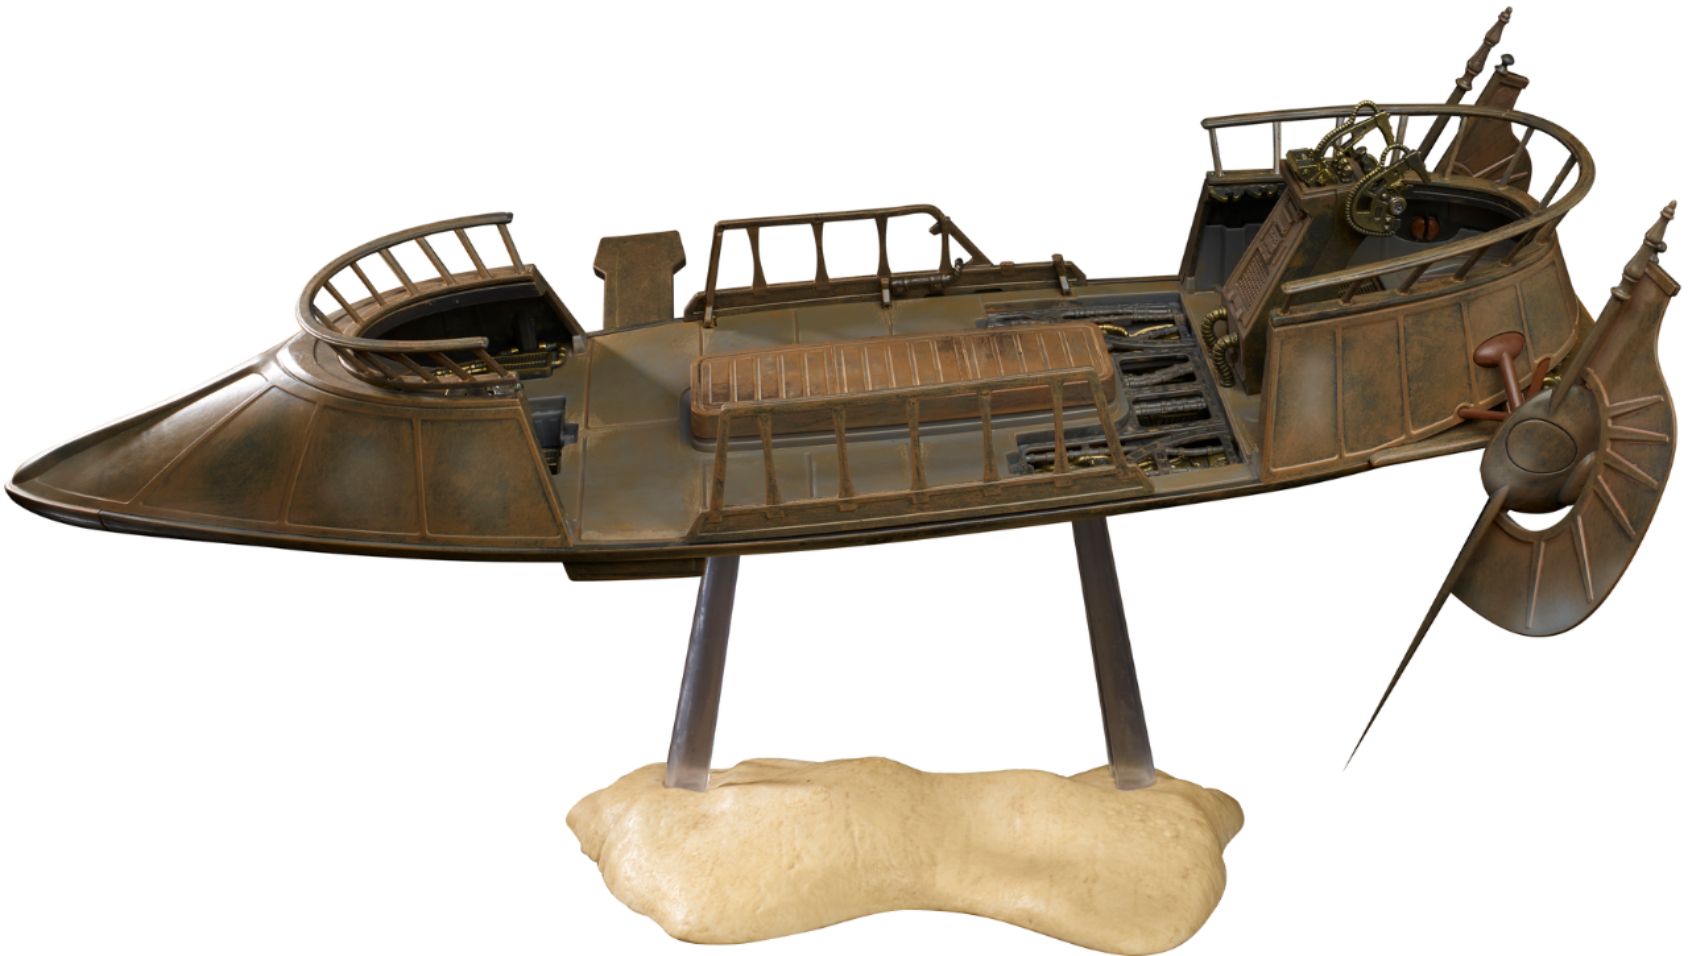 star wars the vintage collection skiff vehicle